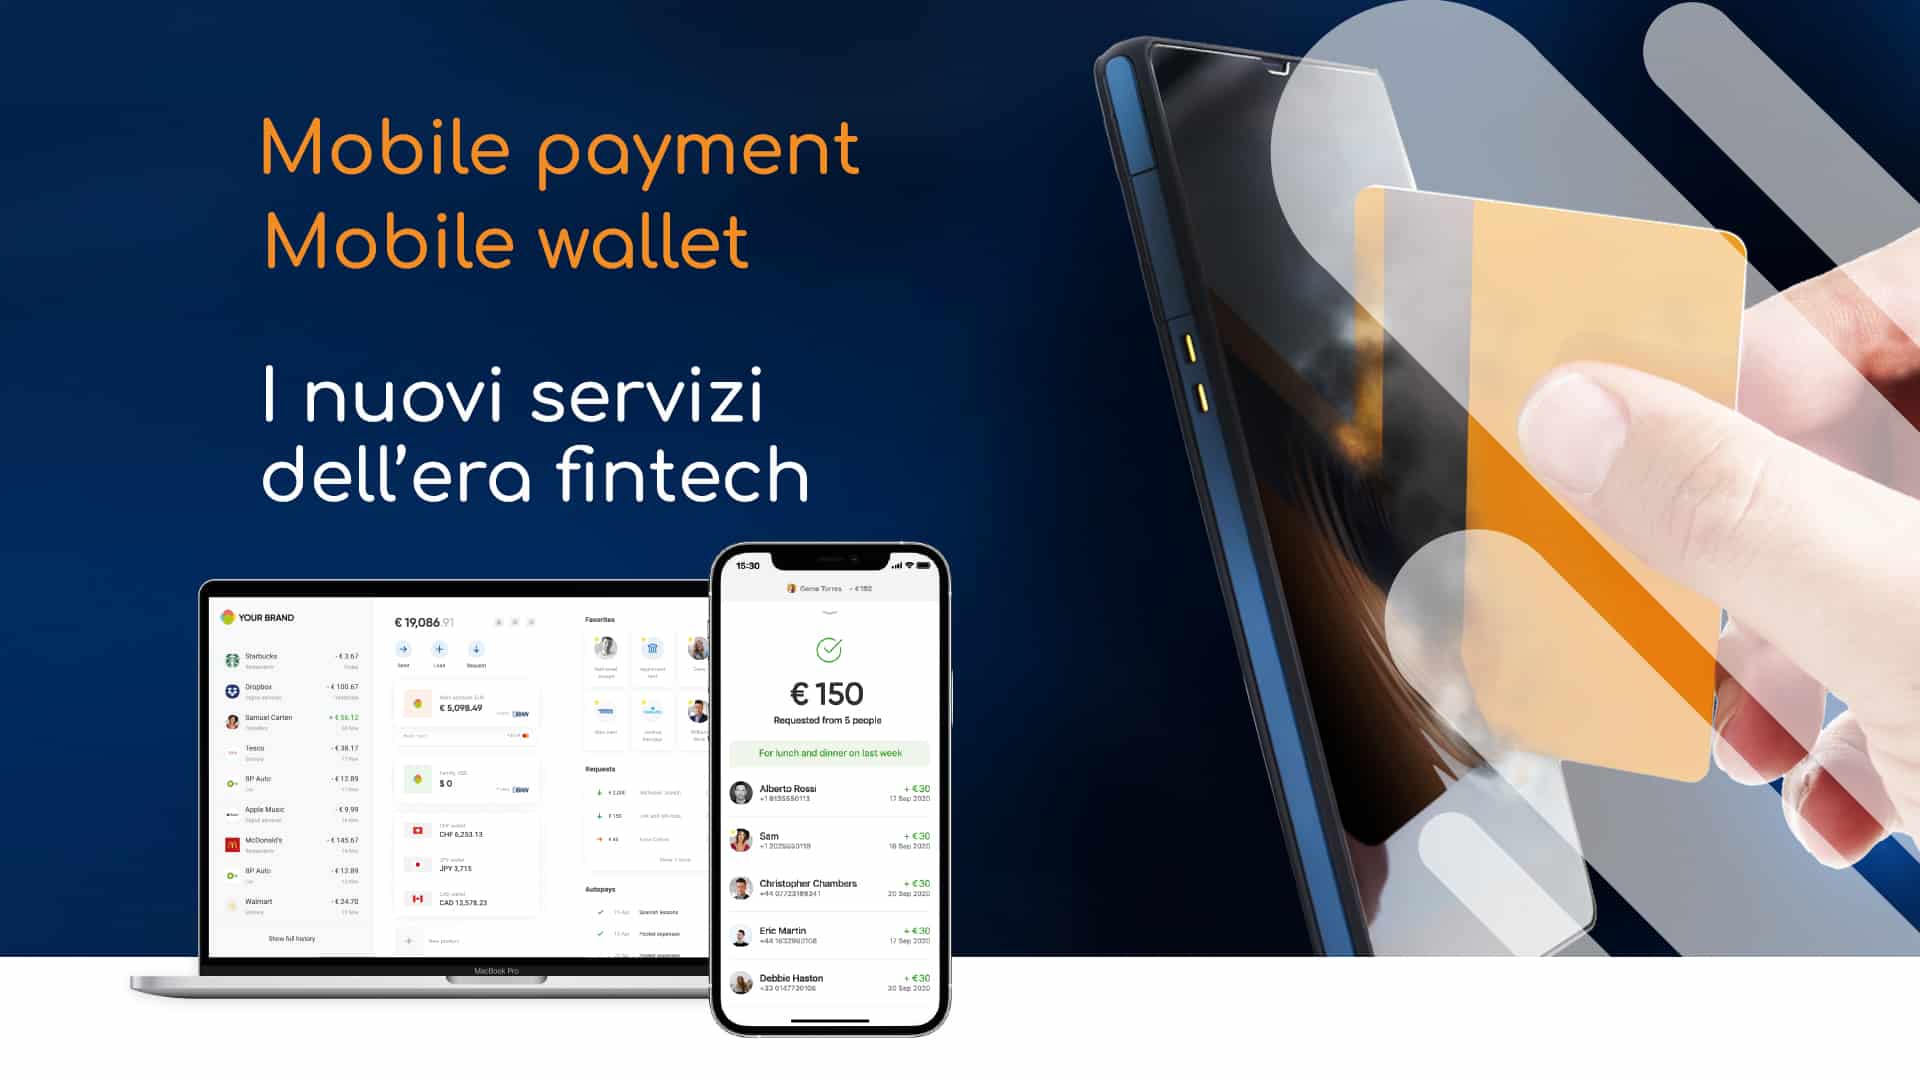 Mobile payment - Smart Bank 800